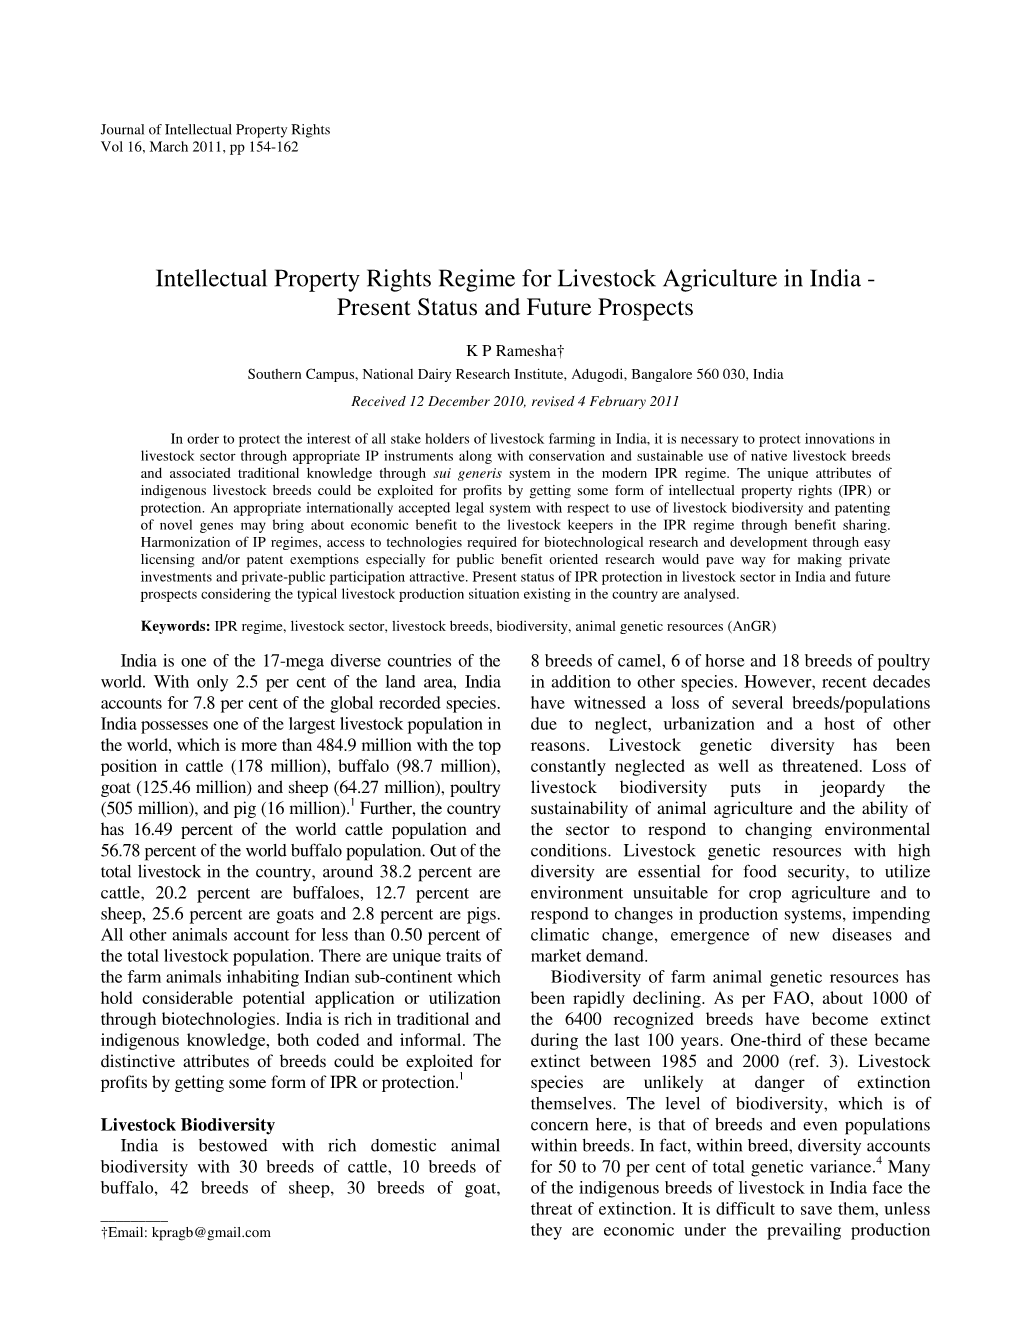 Intellectual Property Rights Regime for Livestock Agriculture in India - Present Status and Future Prospects